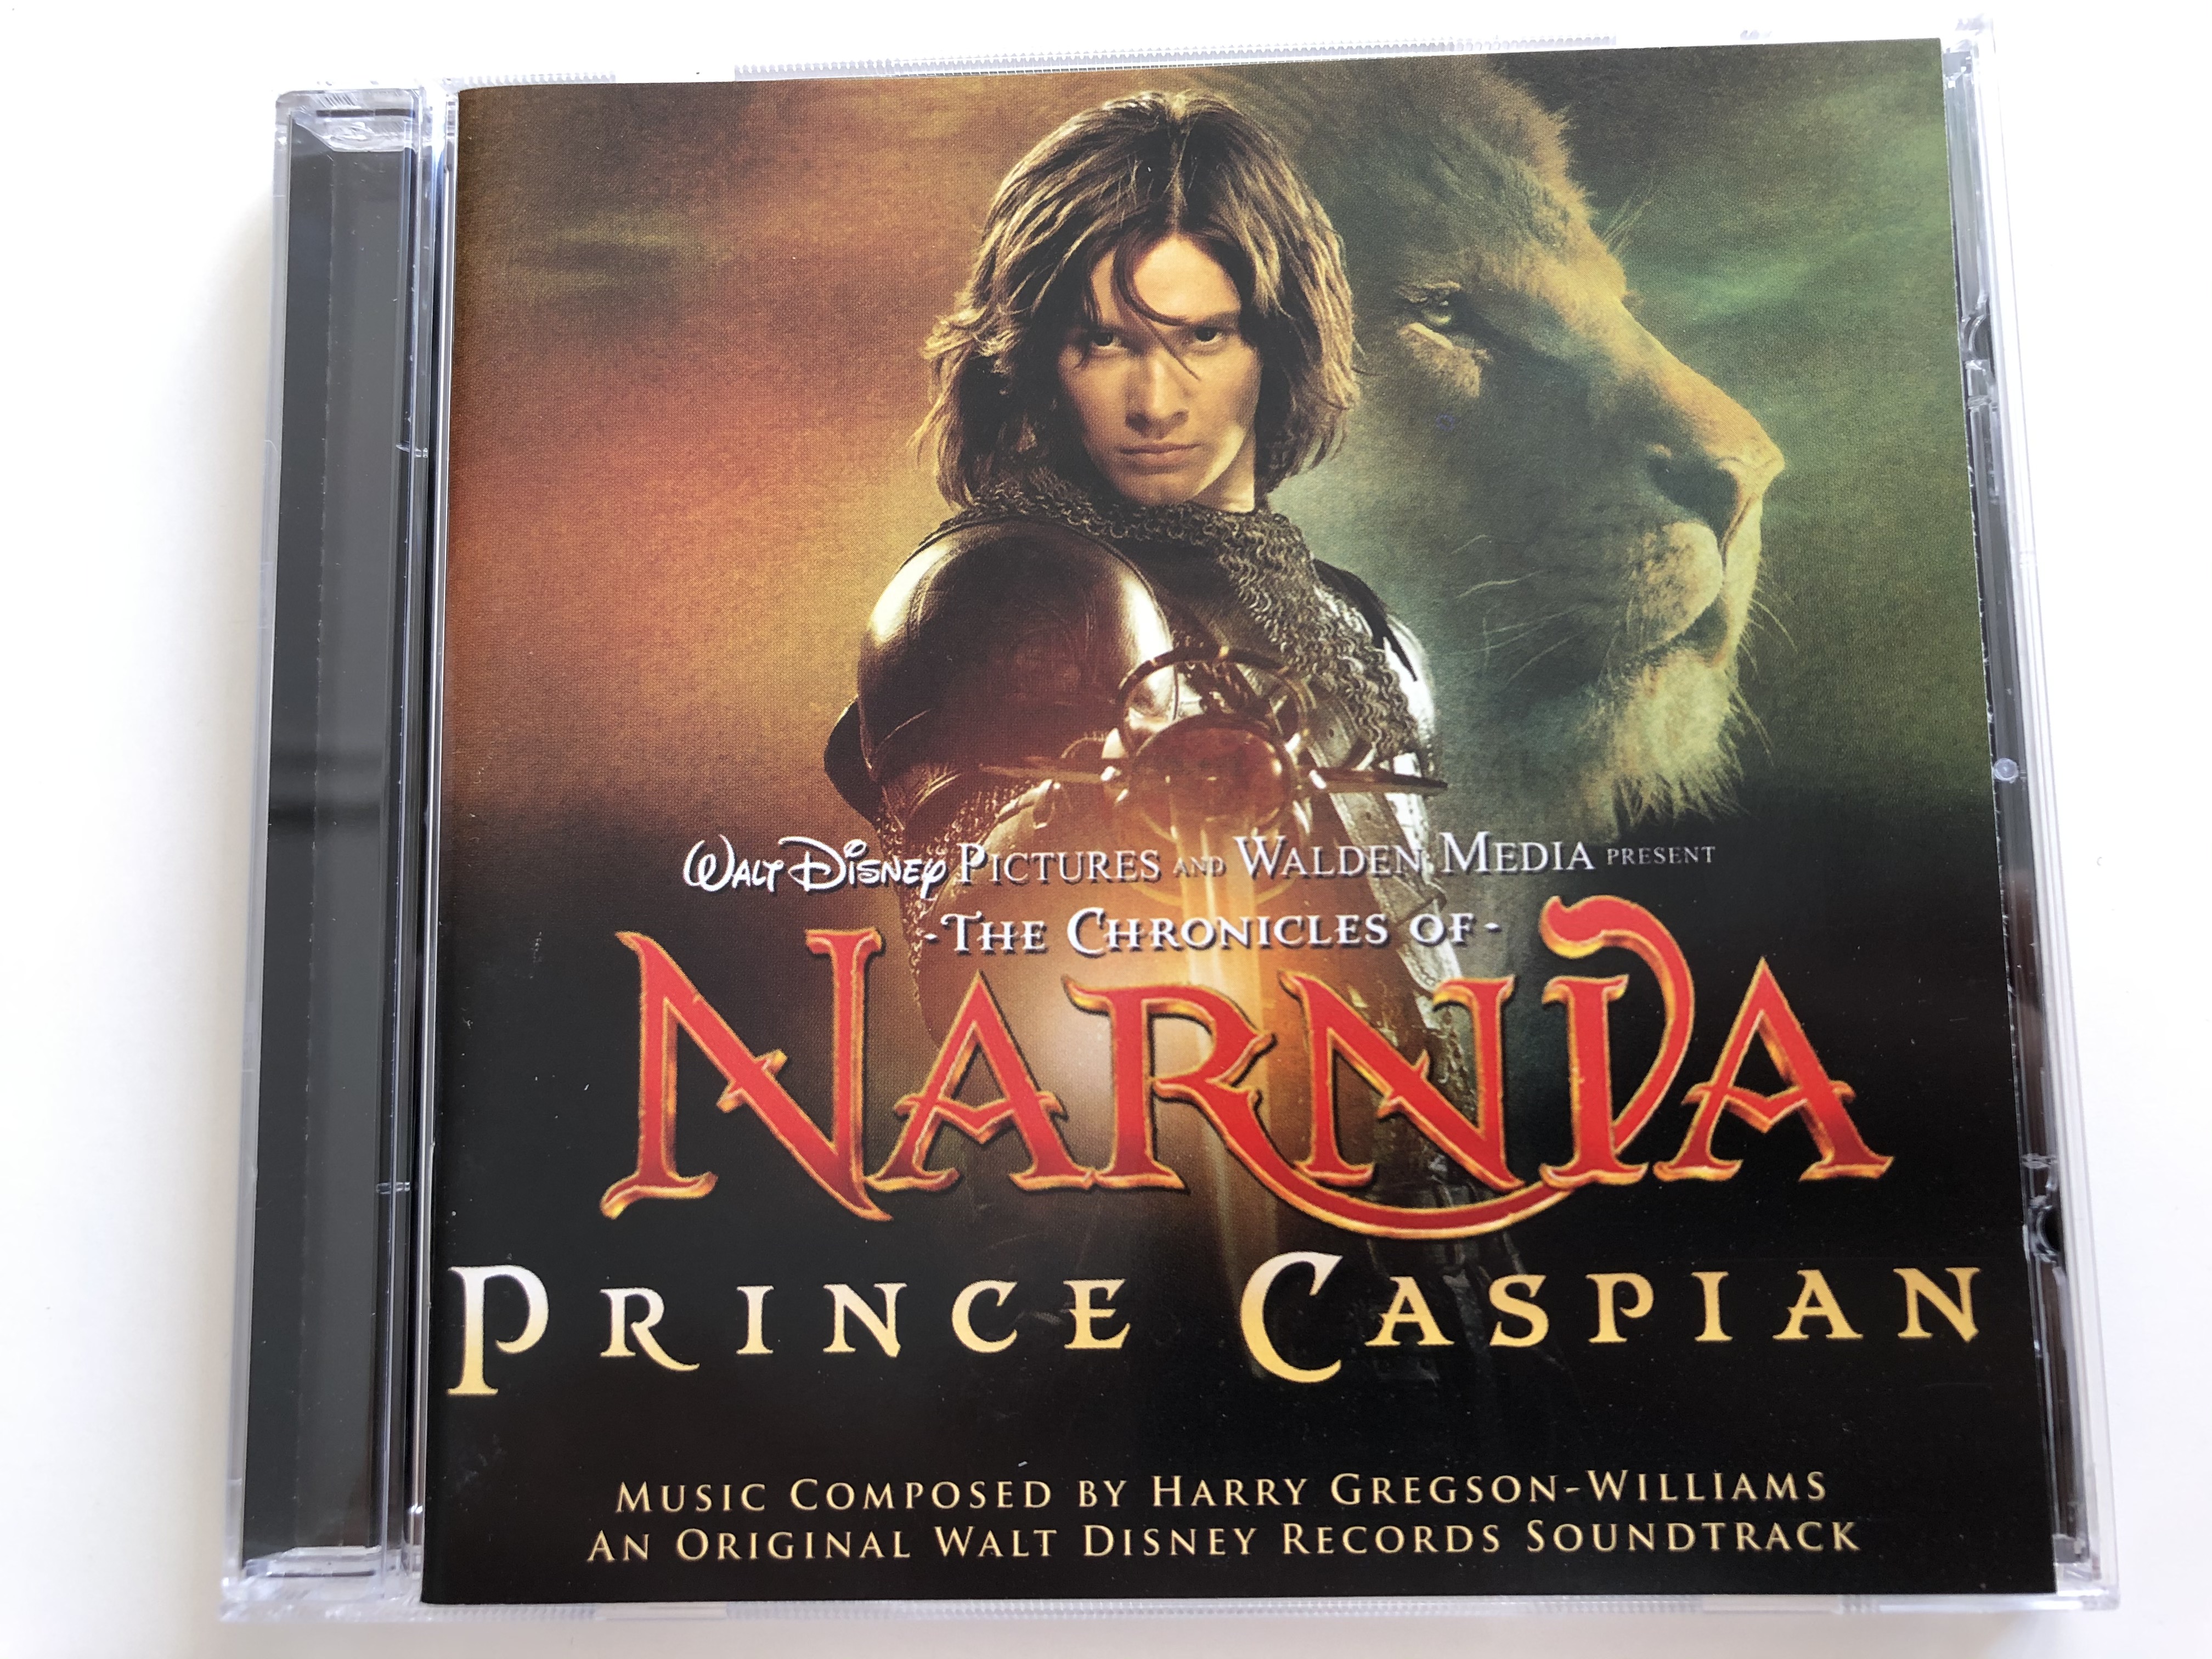 the-chronicles-of-narnia-prince-caspian-music-composed-by-harry-gregson-williams-an-original-walt-disney-records-soundtrack-walt-disney-records-audio-cd-2008-5099922646101-1-.jpg